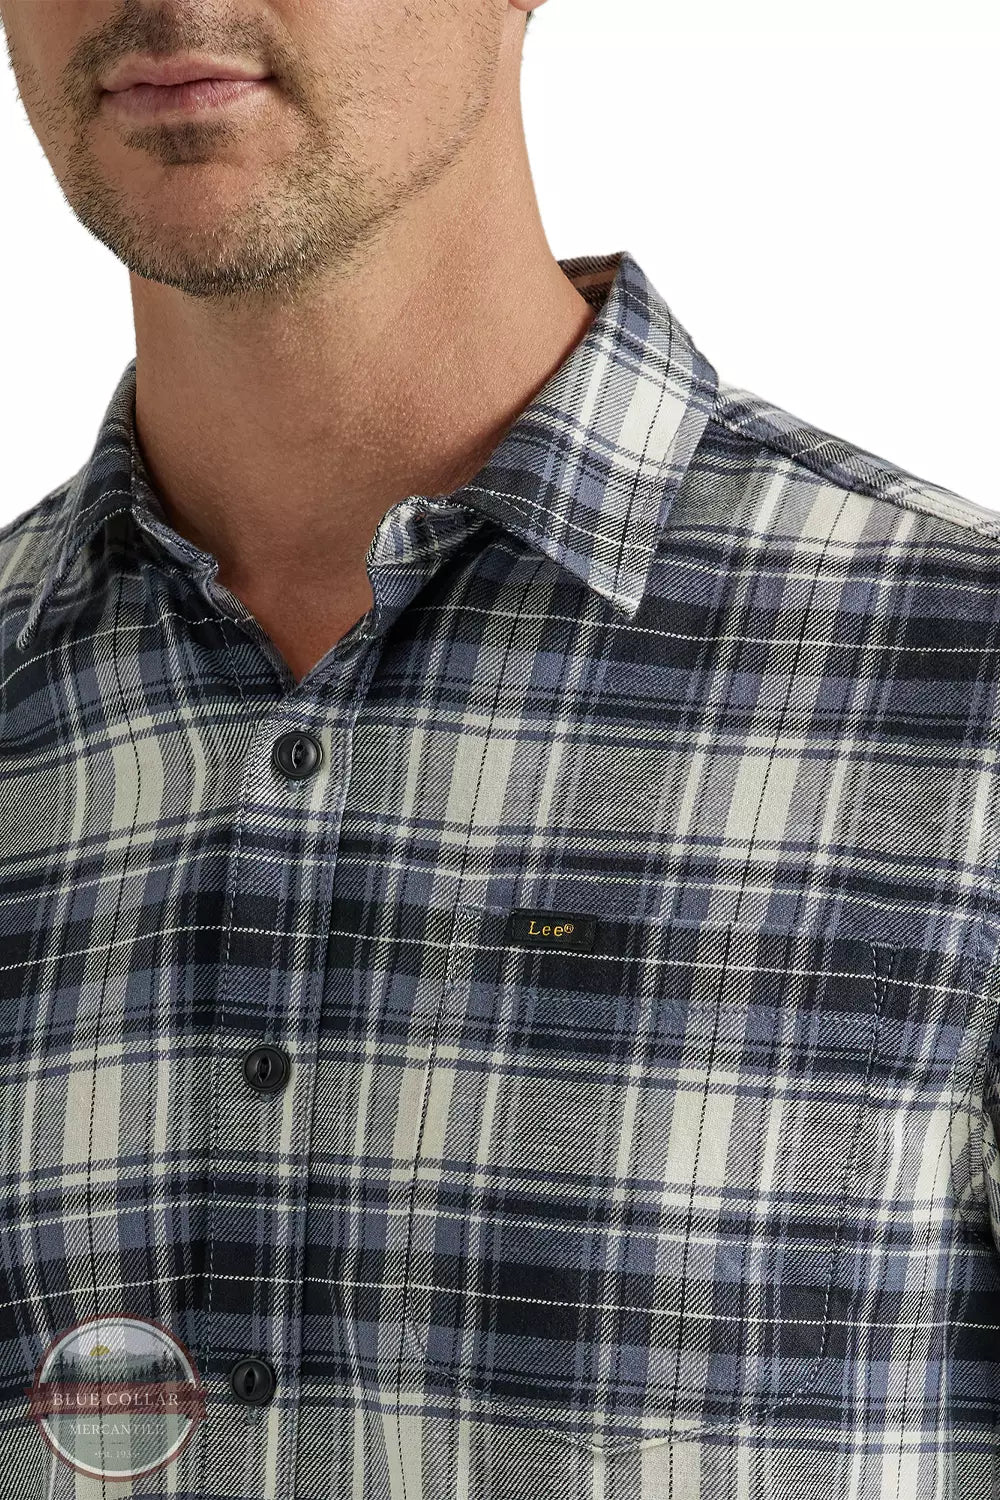 Lee 112339789 Extreme Motion All Purpose Button Down Long Sleeve Shirt in Unionall Black Plaid Detail View